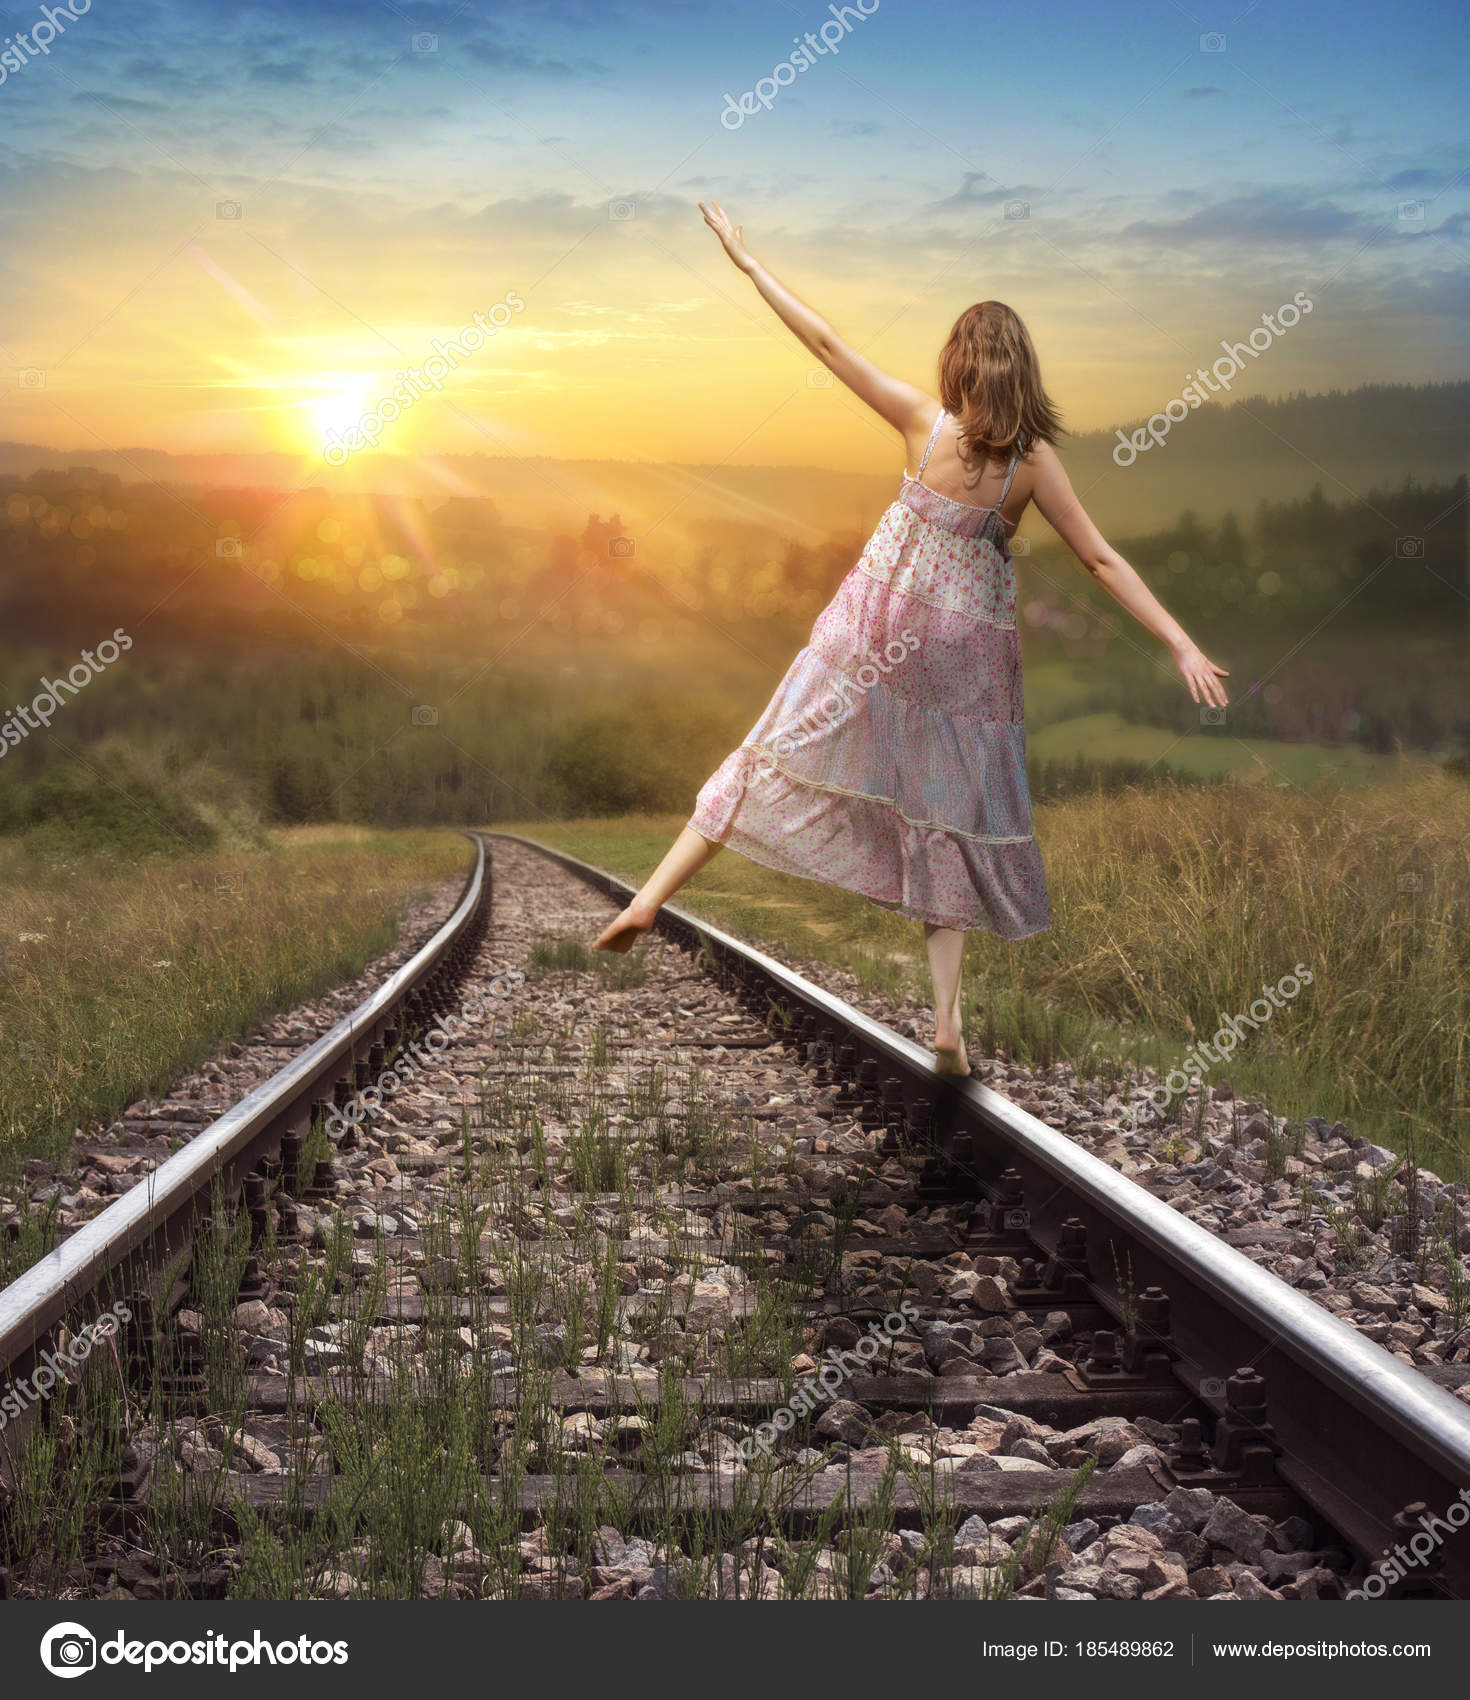 Young Girl Goes On Railway Tracks The Illustration For Cover P